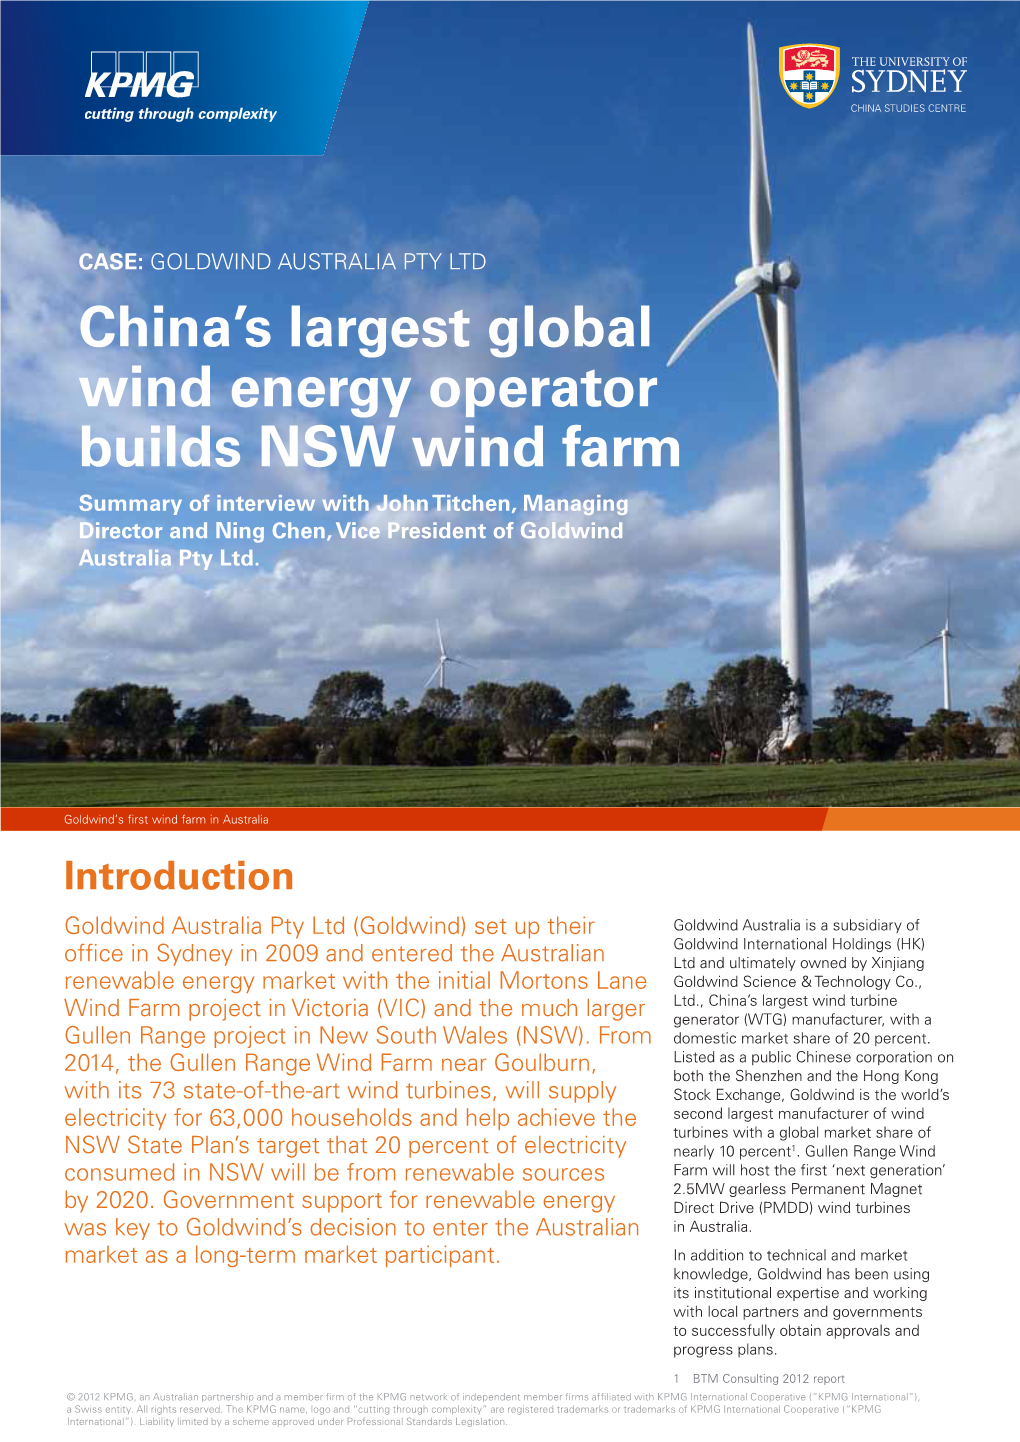 China's Largest Gloabal Wind Energy Operator Builds NSW Wind Farm